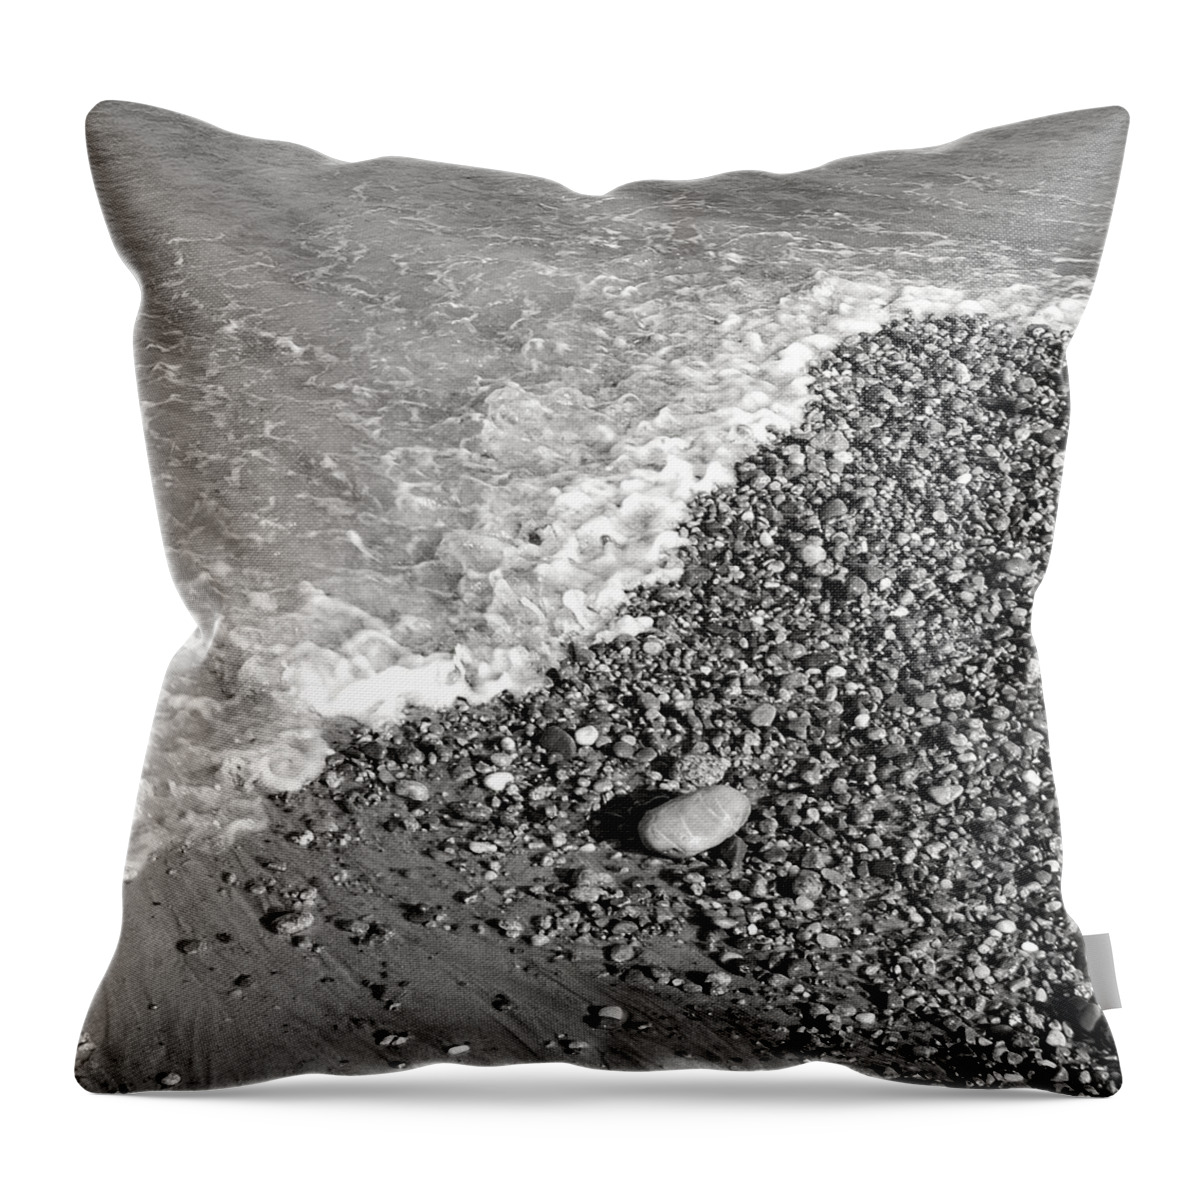 Sand Throw Pillow featuring the photograph Bw2 by Charles Harden